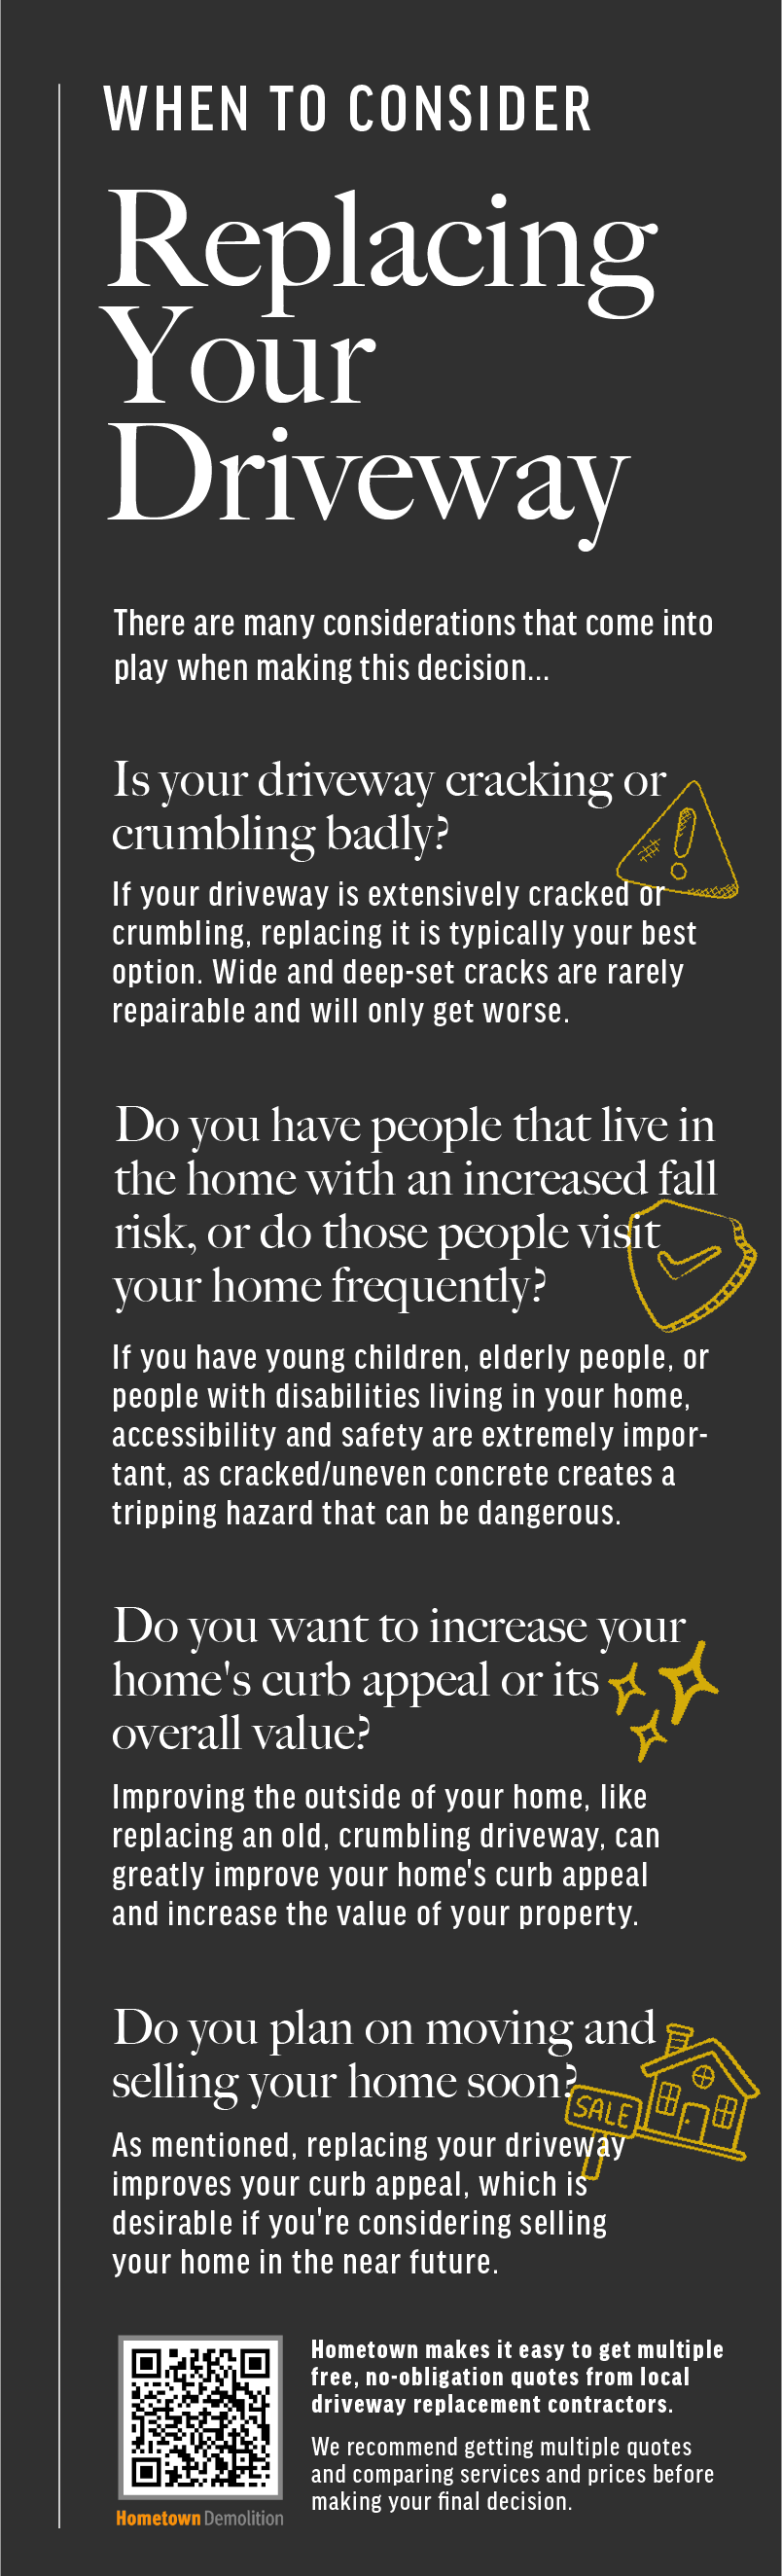 when to consider replacing driveway infographic